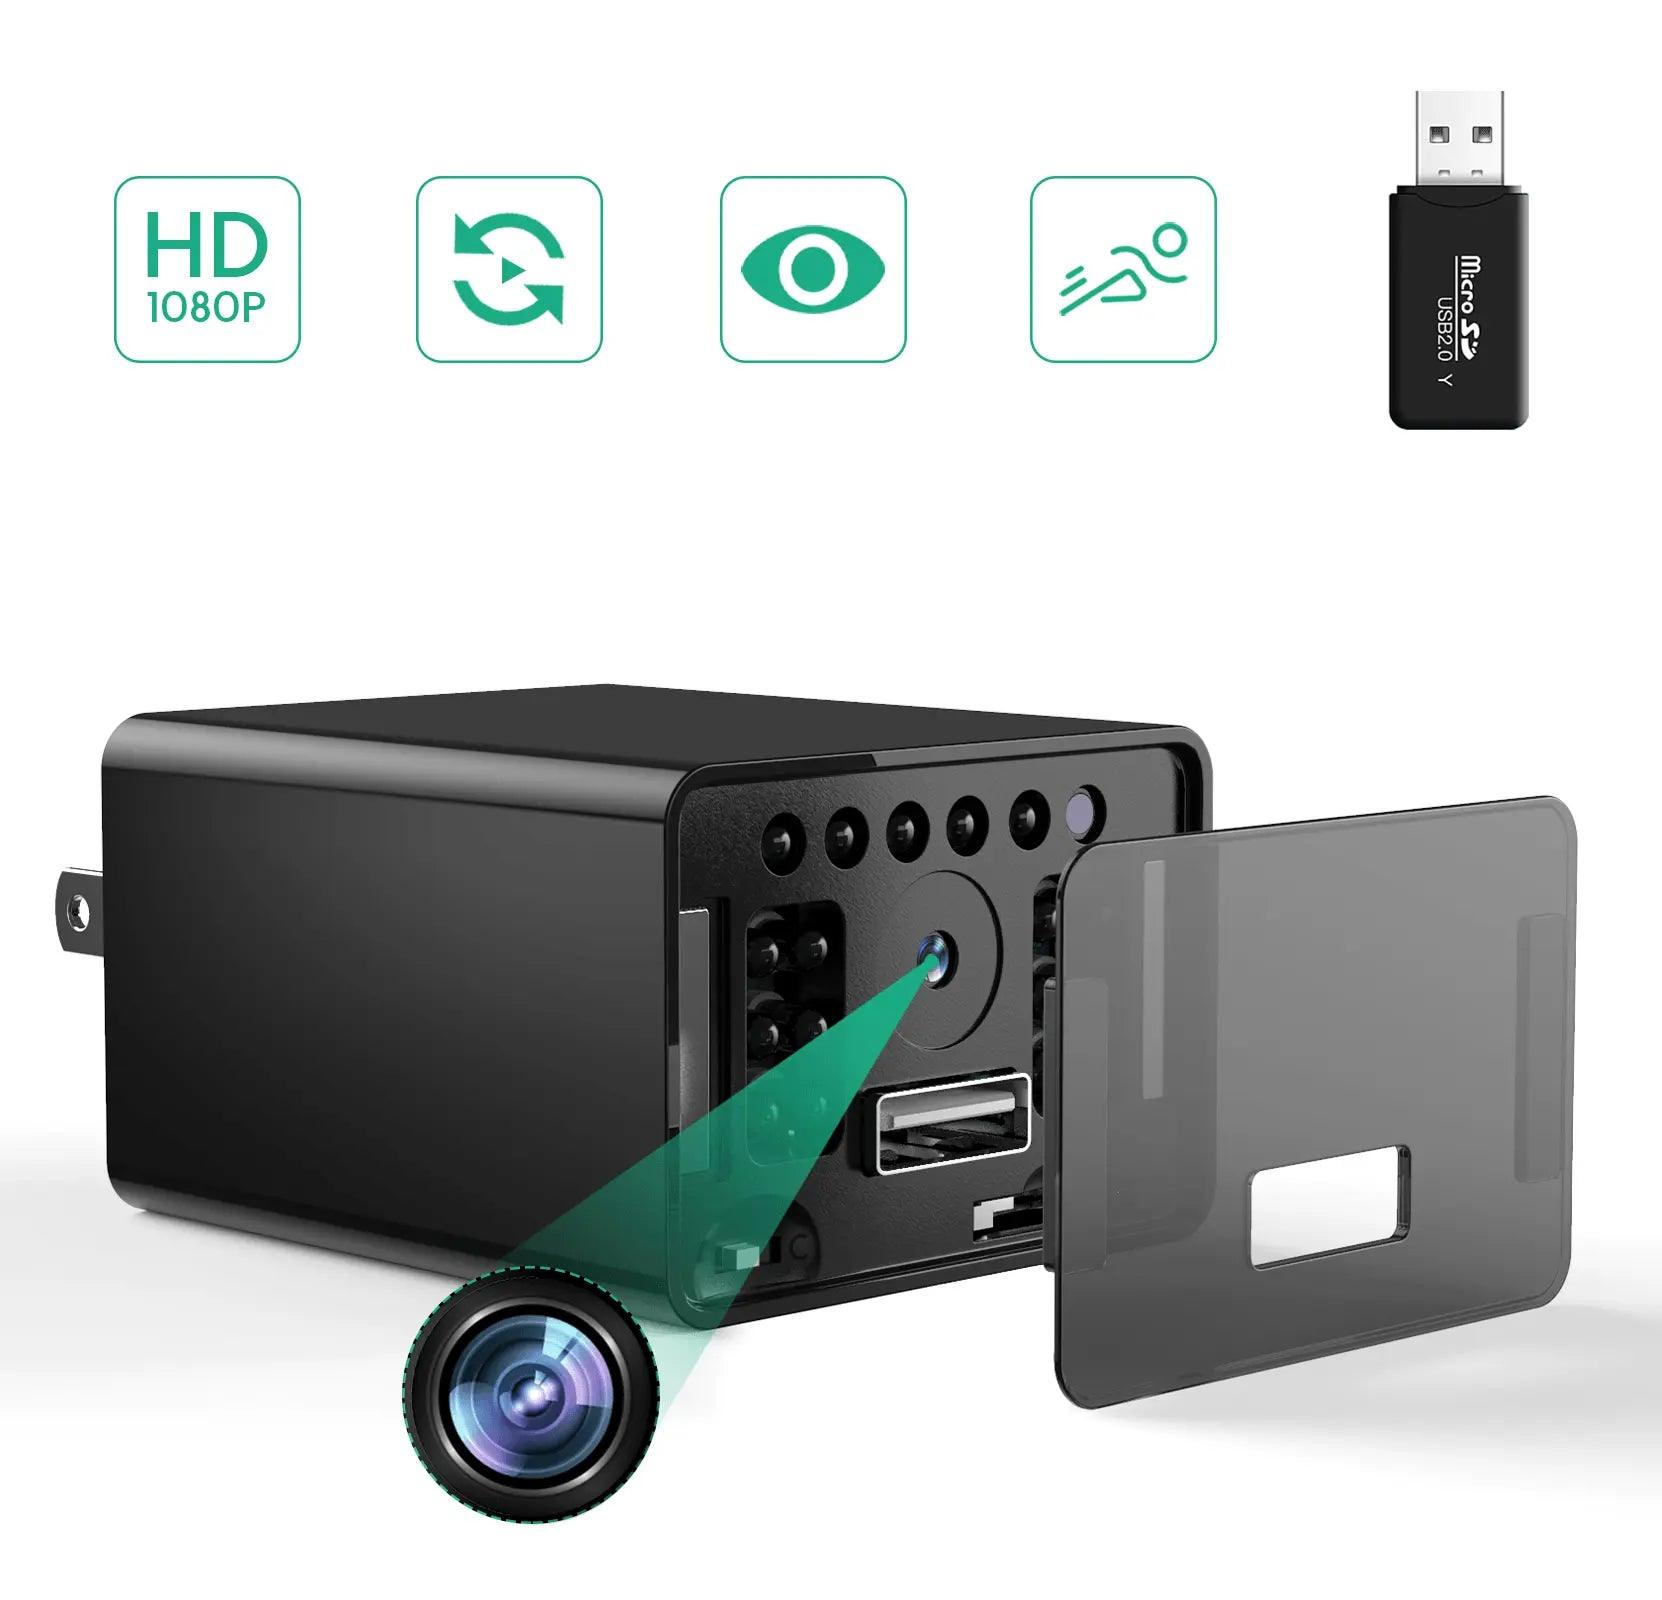 Compact Plug-and-Play Camera with Night Vision, Motion Detection, and 128GB Storage - Wide-Angle View, No WiFi Needed - Swayfer Tech